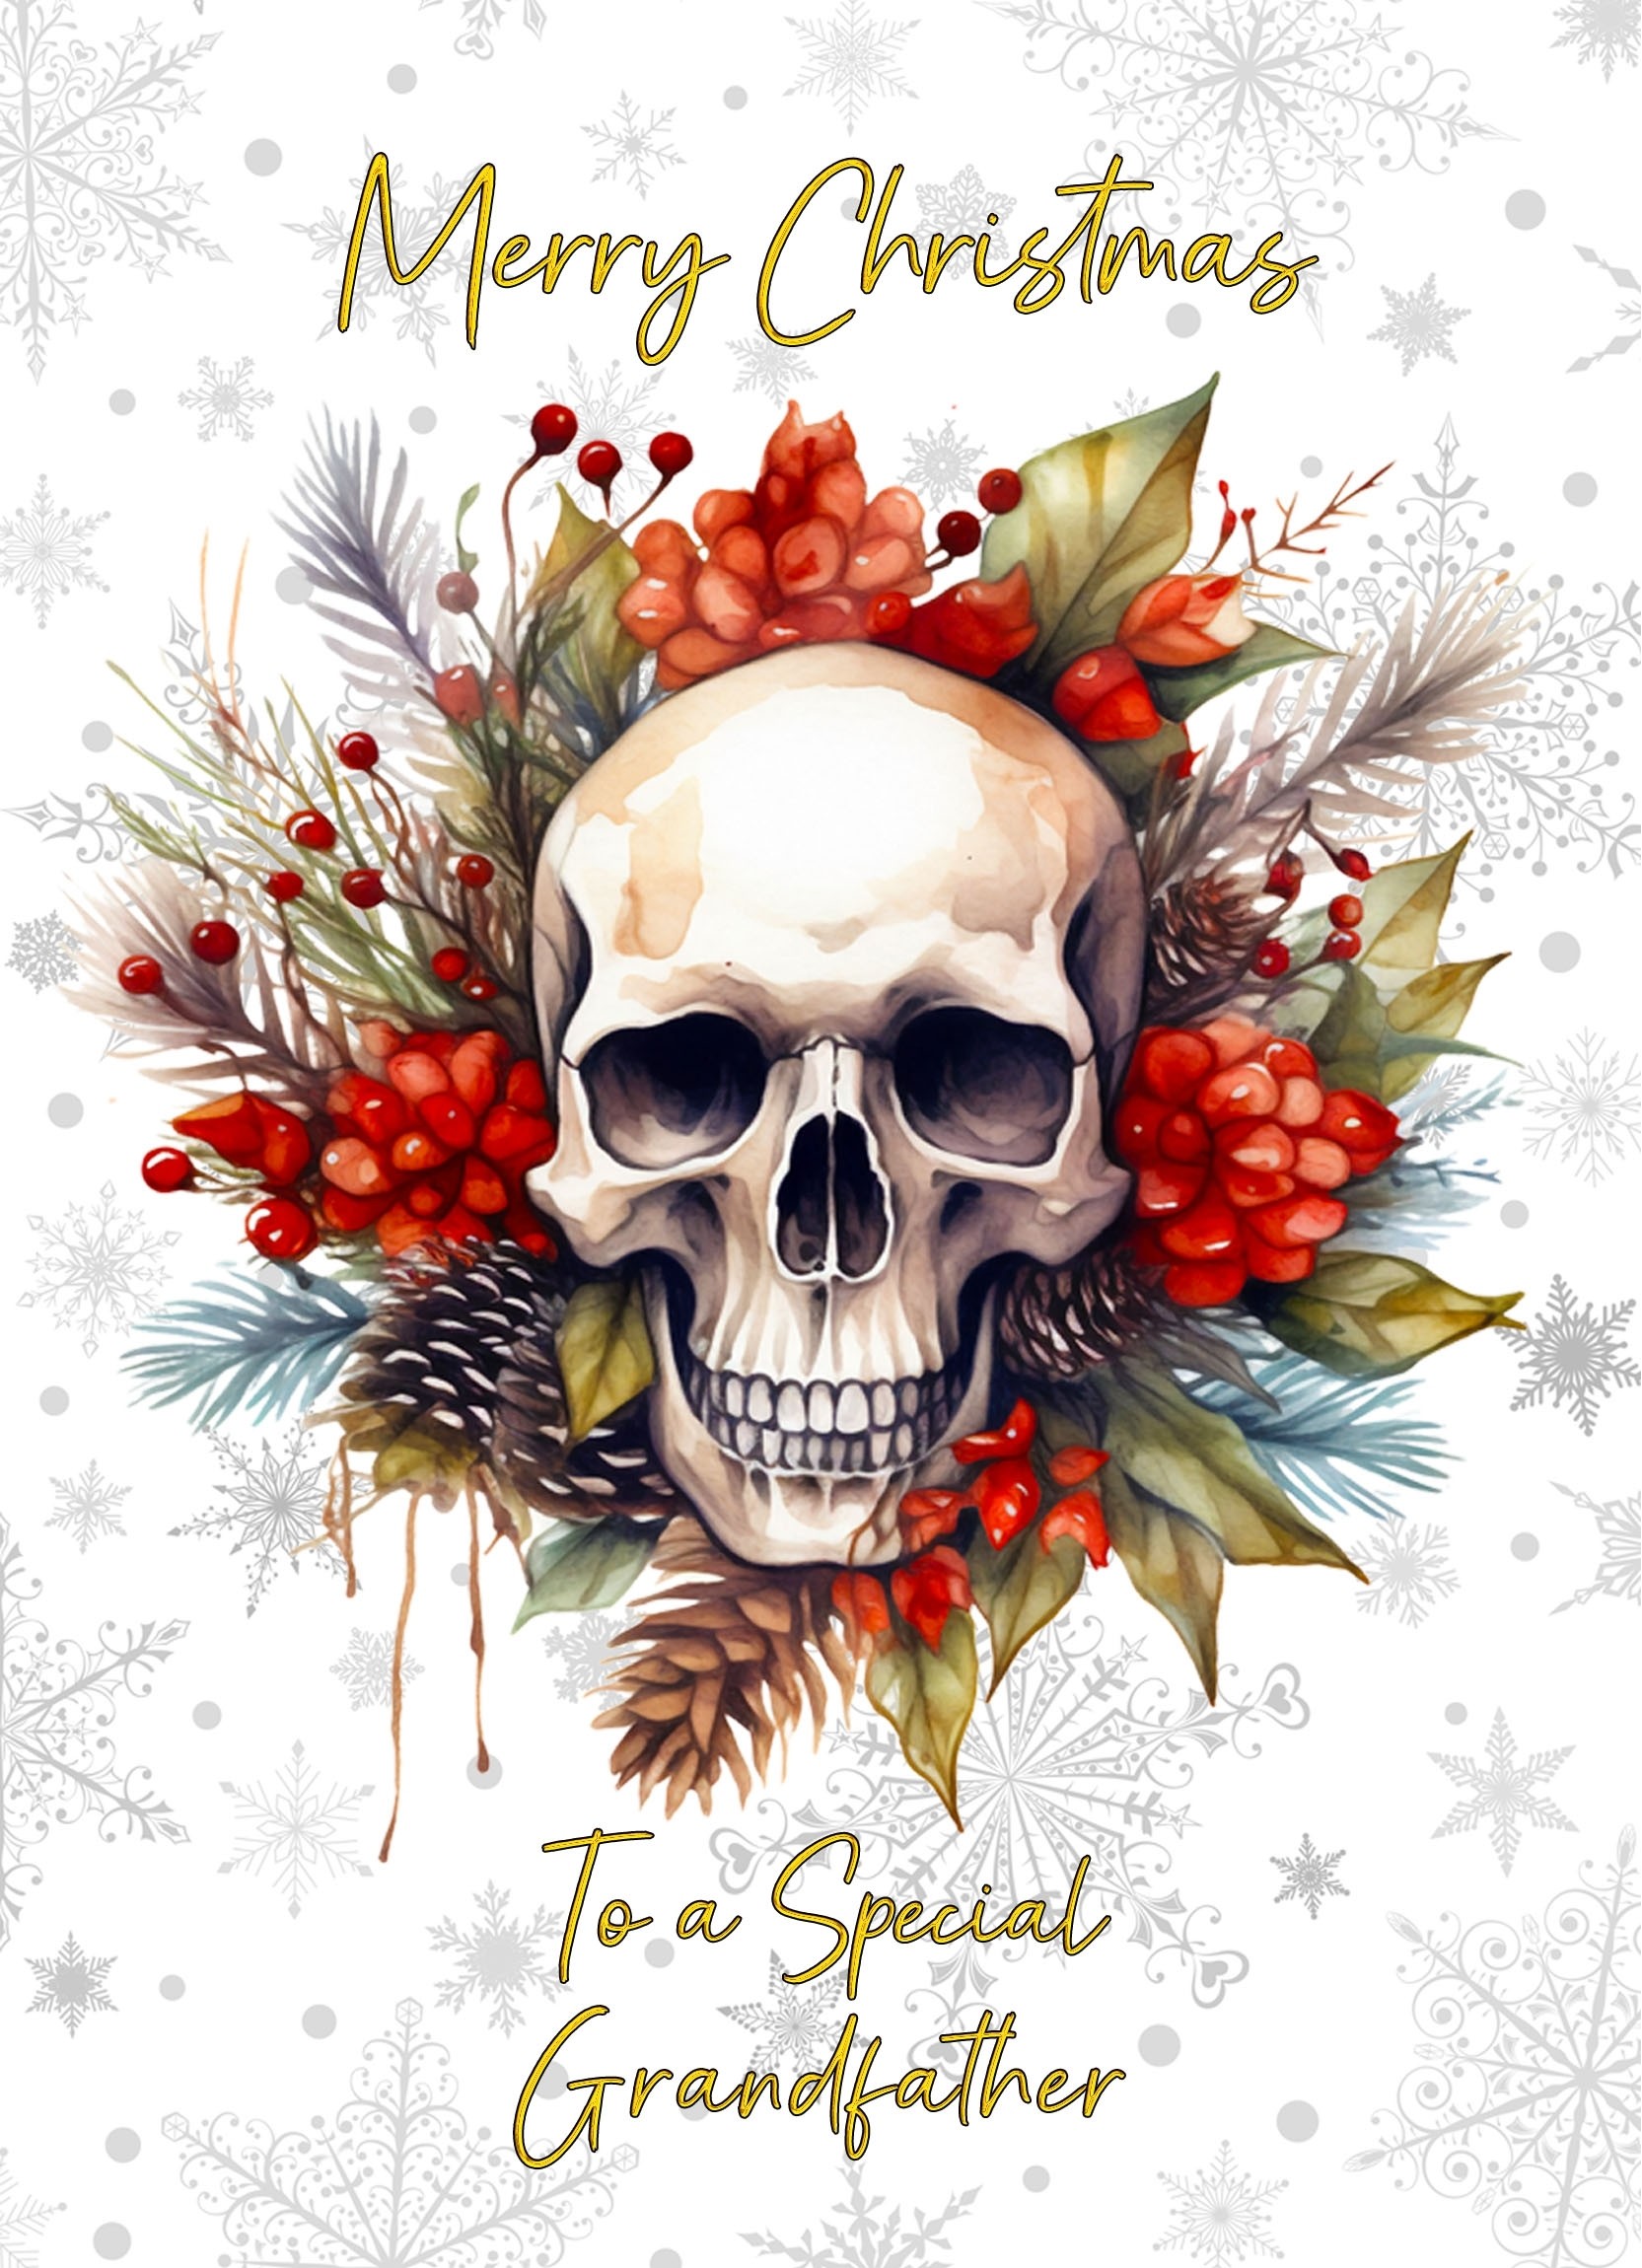 Christmas Card For Grandfather (Gothic Fantasy Skull Wreath)